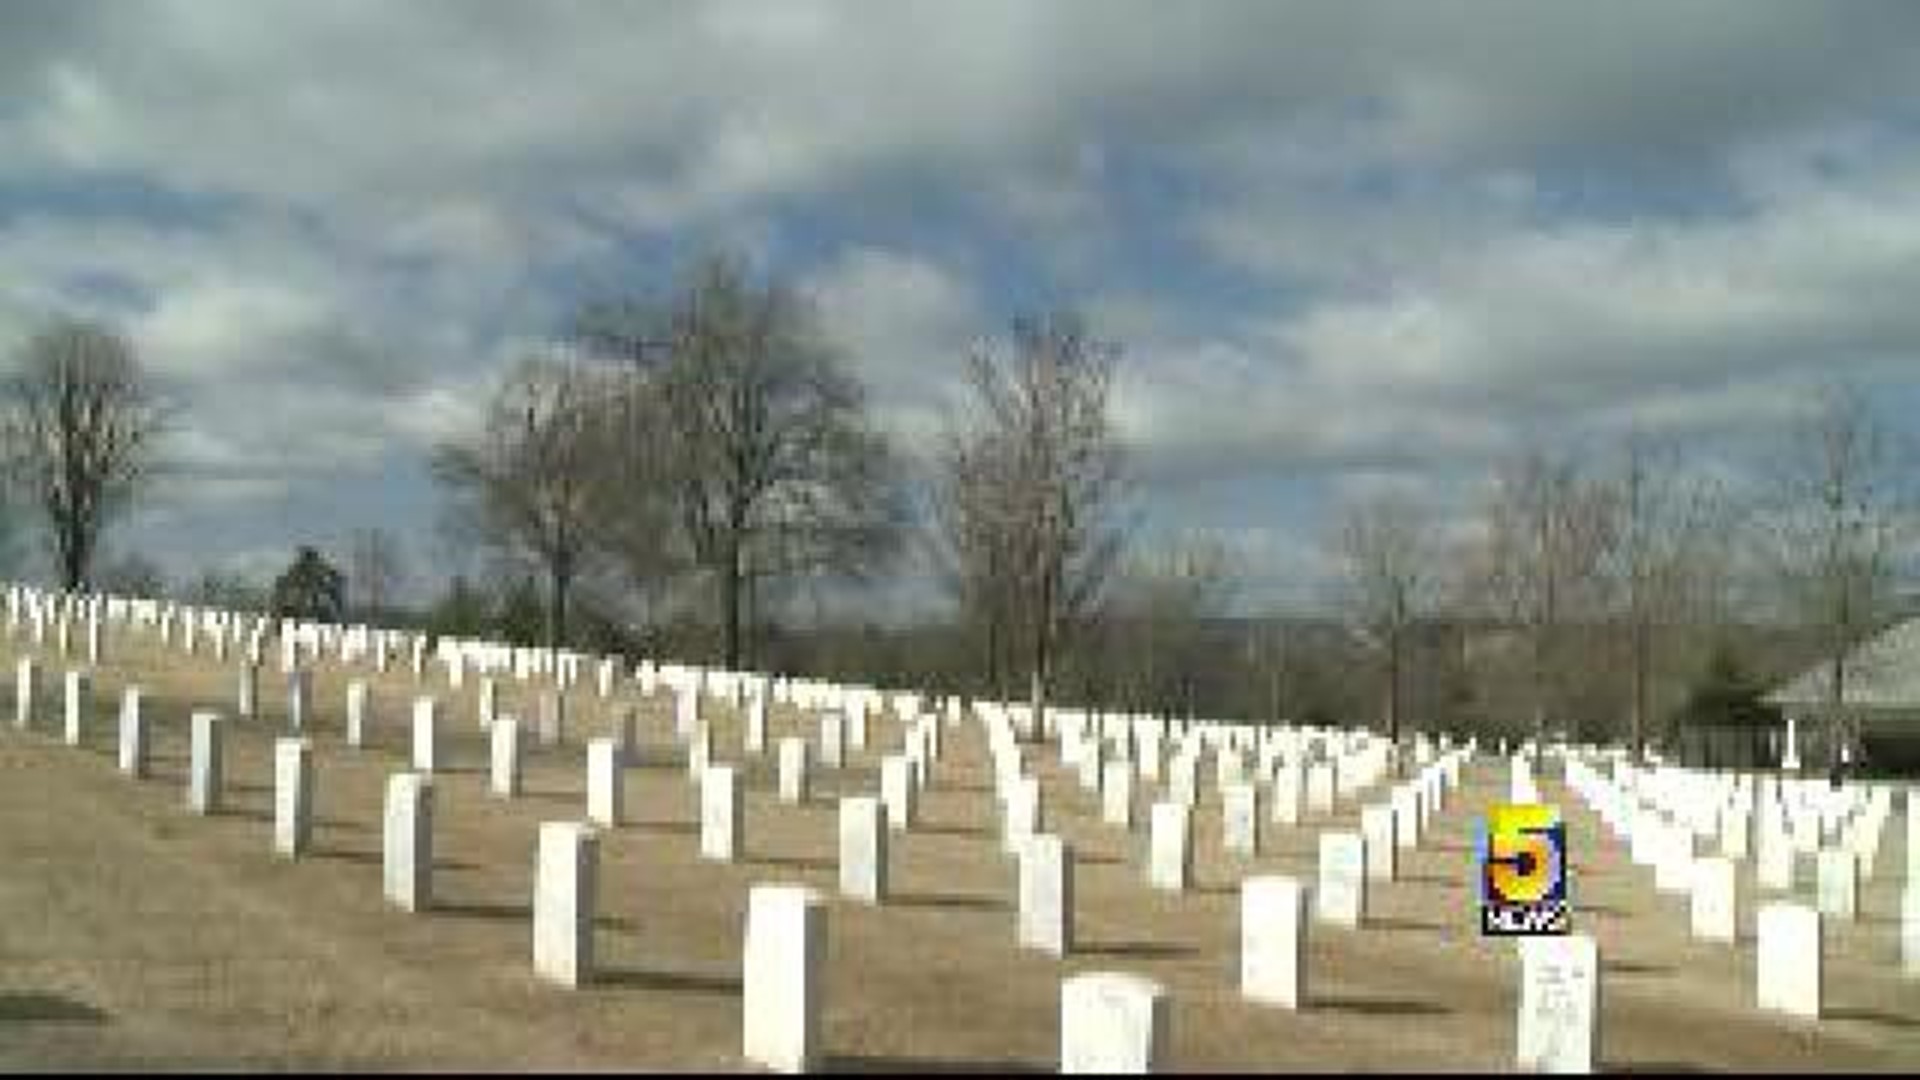 National Cemetery To Recieve 2-Acre Donation